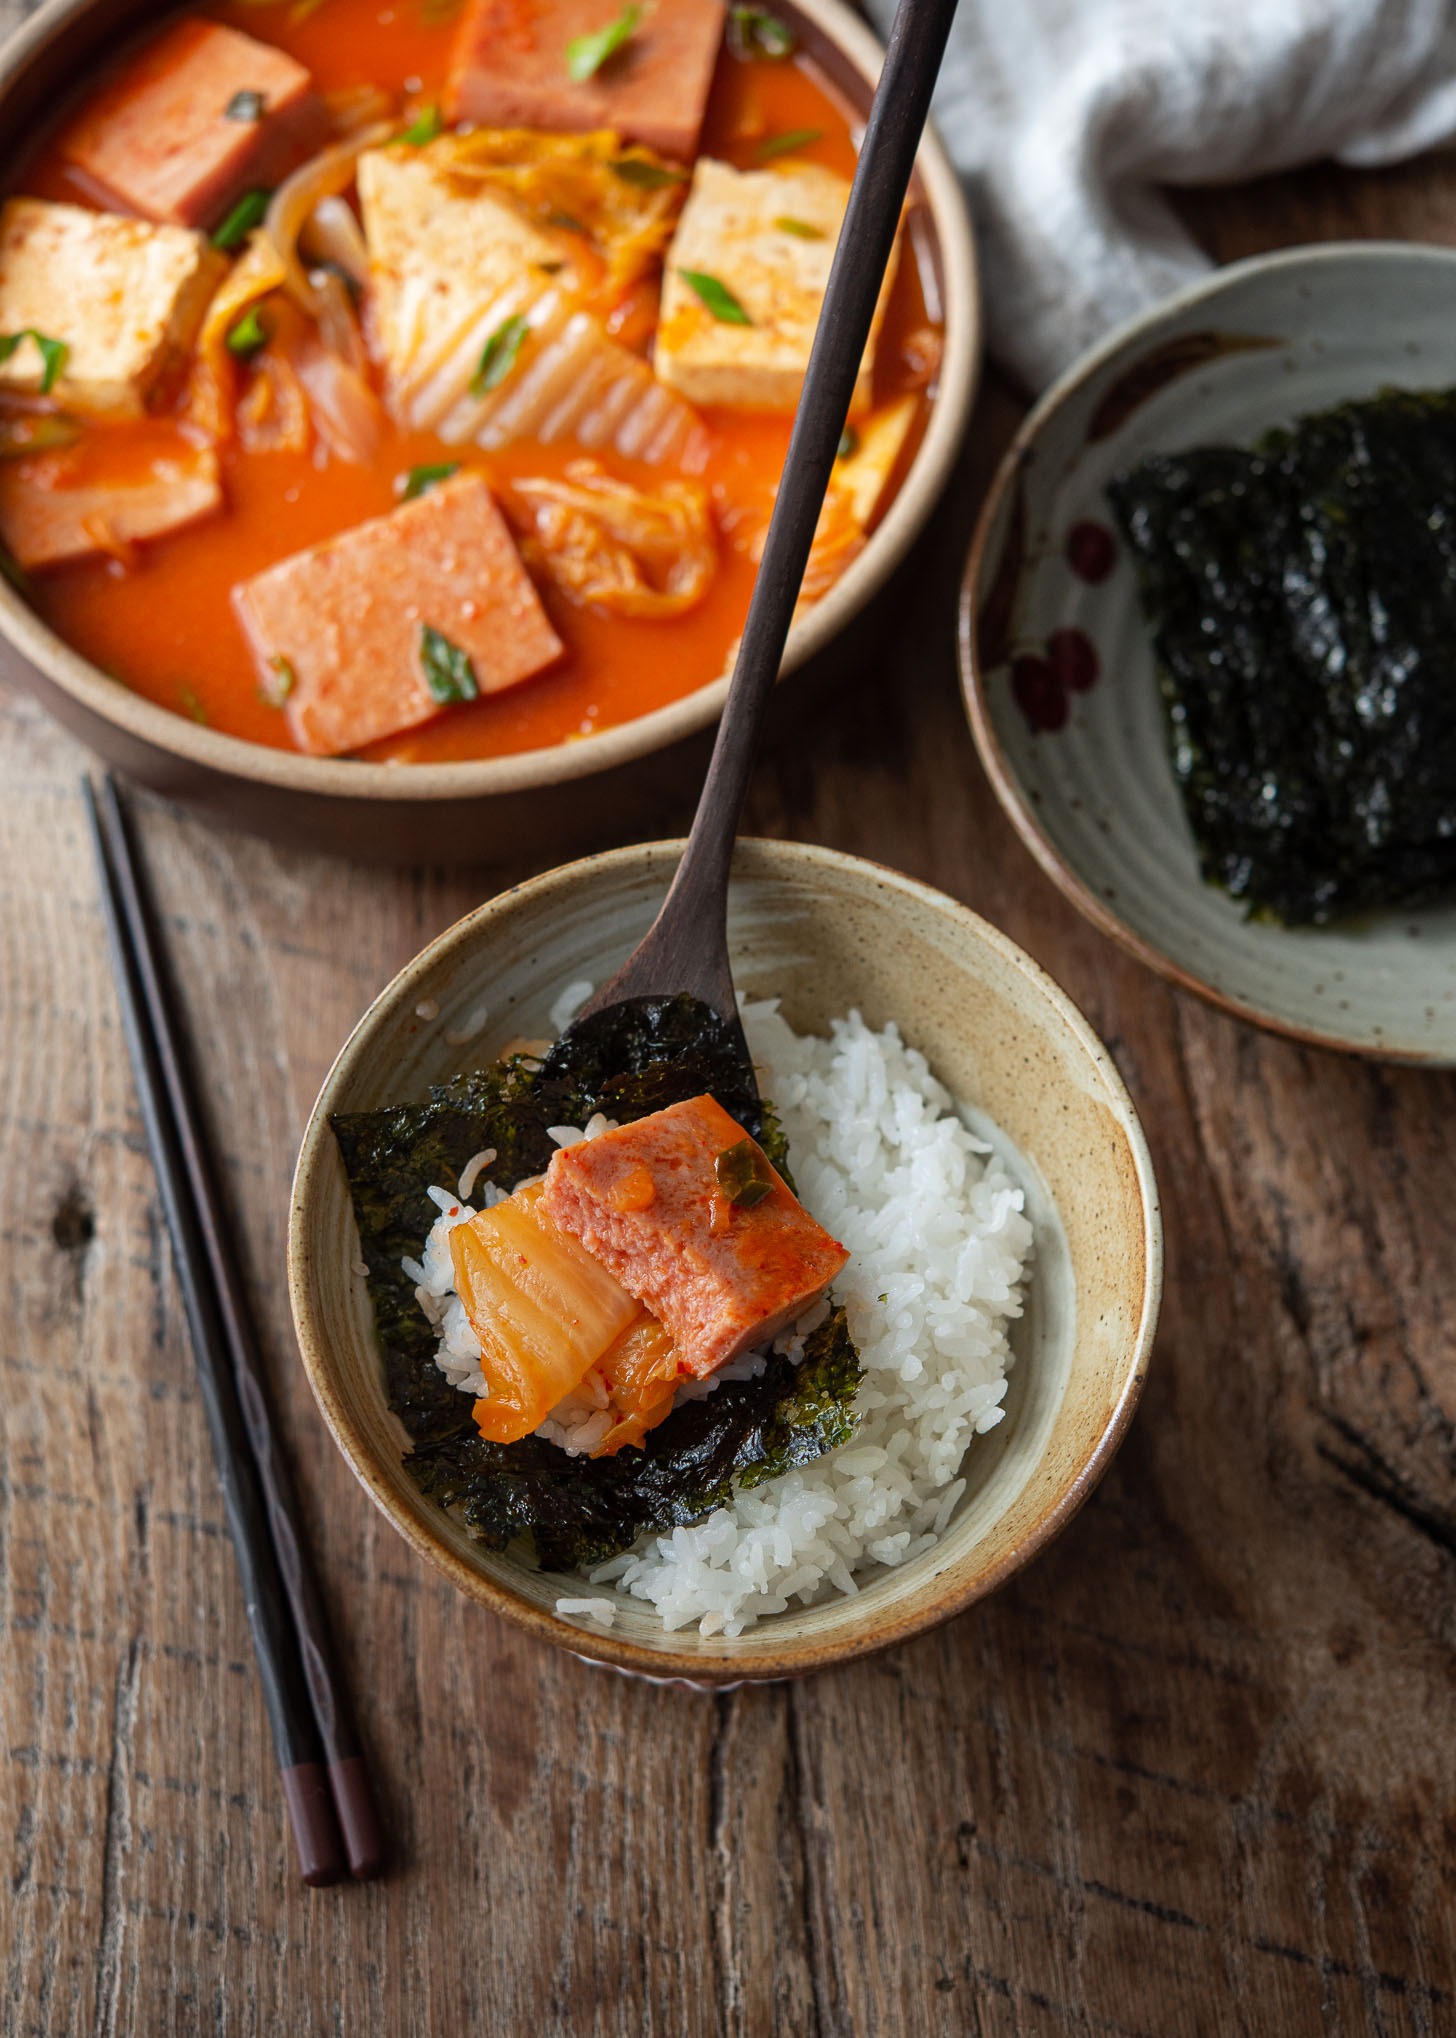 Spam kimchi jjigae is wrapped with roasted seaweed and served over rice.